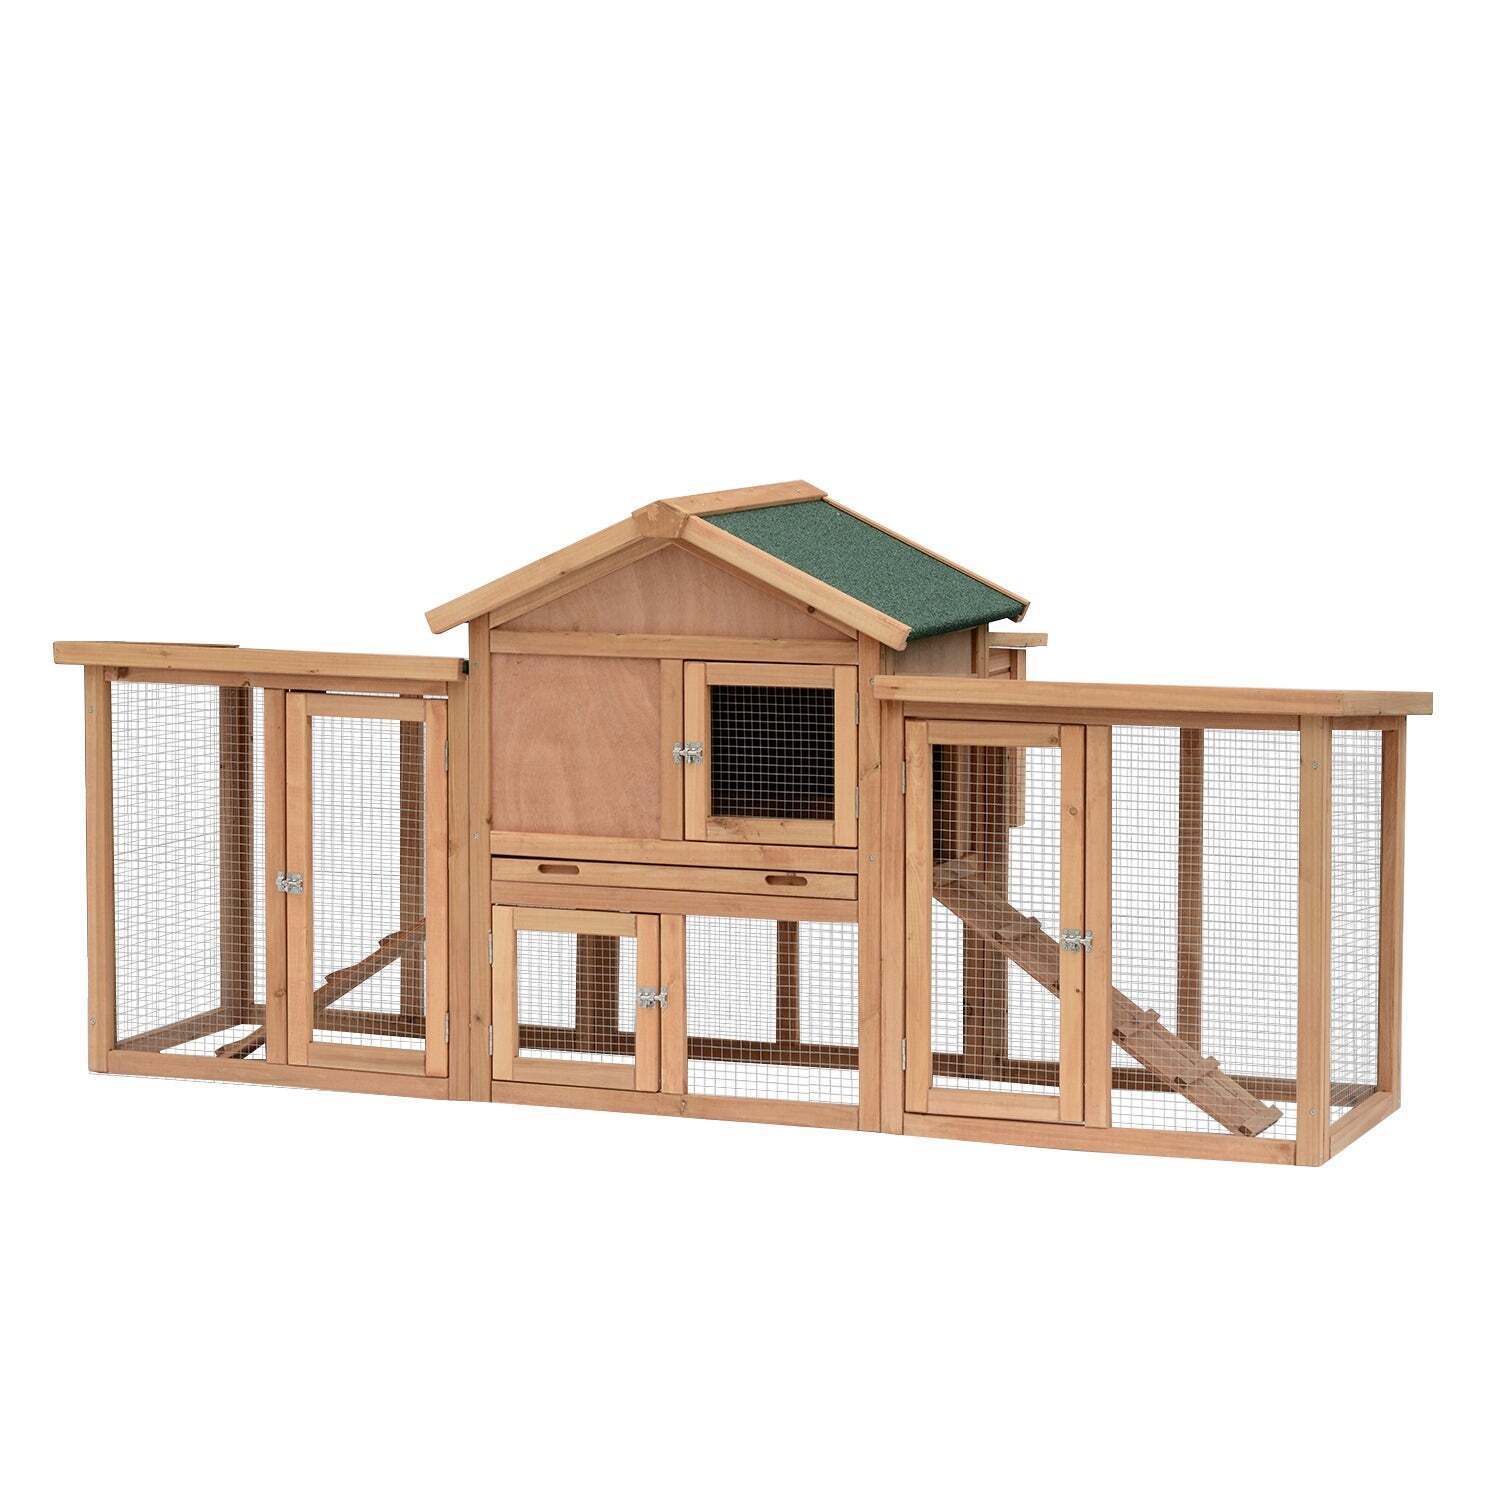 Covered Two ramp Centered Chicken Coop Kit